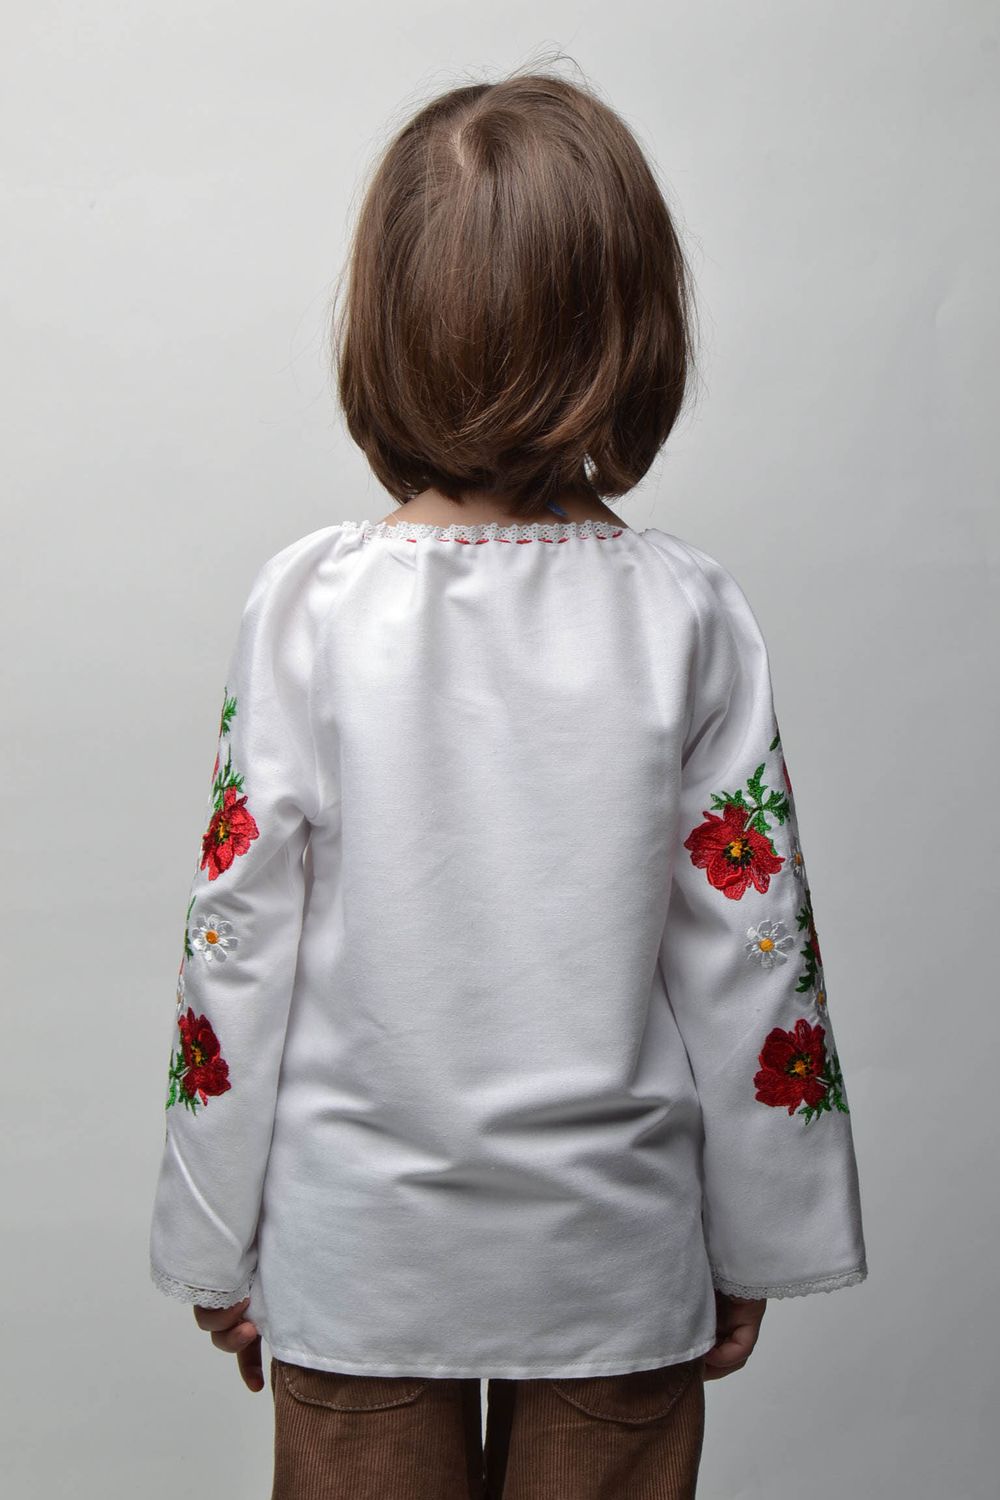 Satin stitch embroidered shirt for 5-7 years old girl photo 3